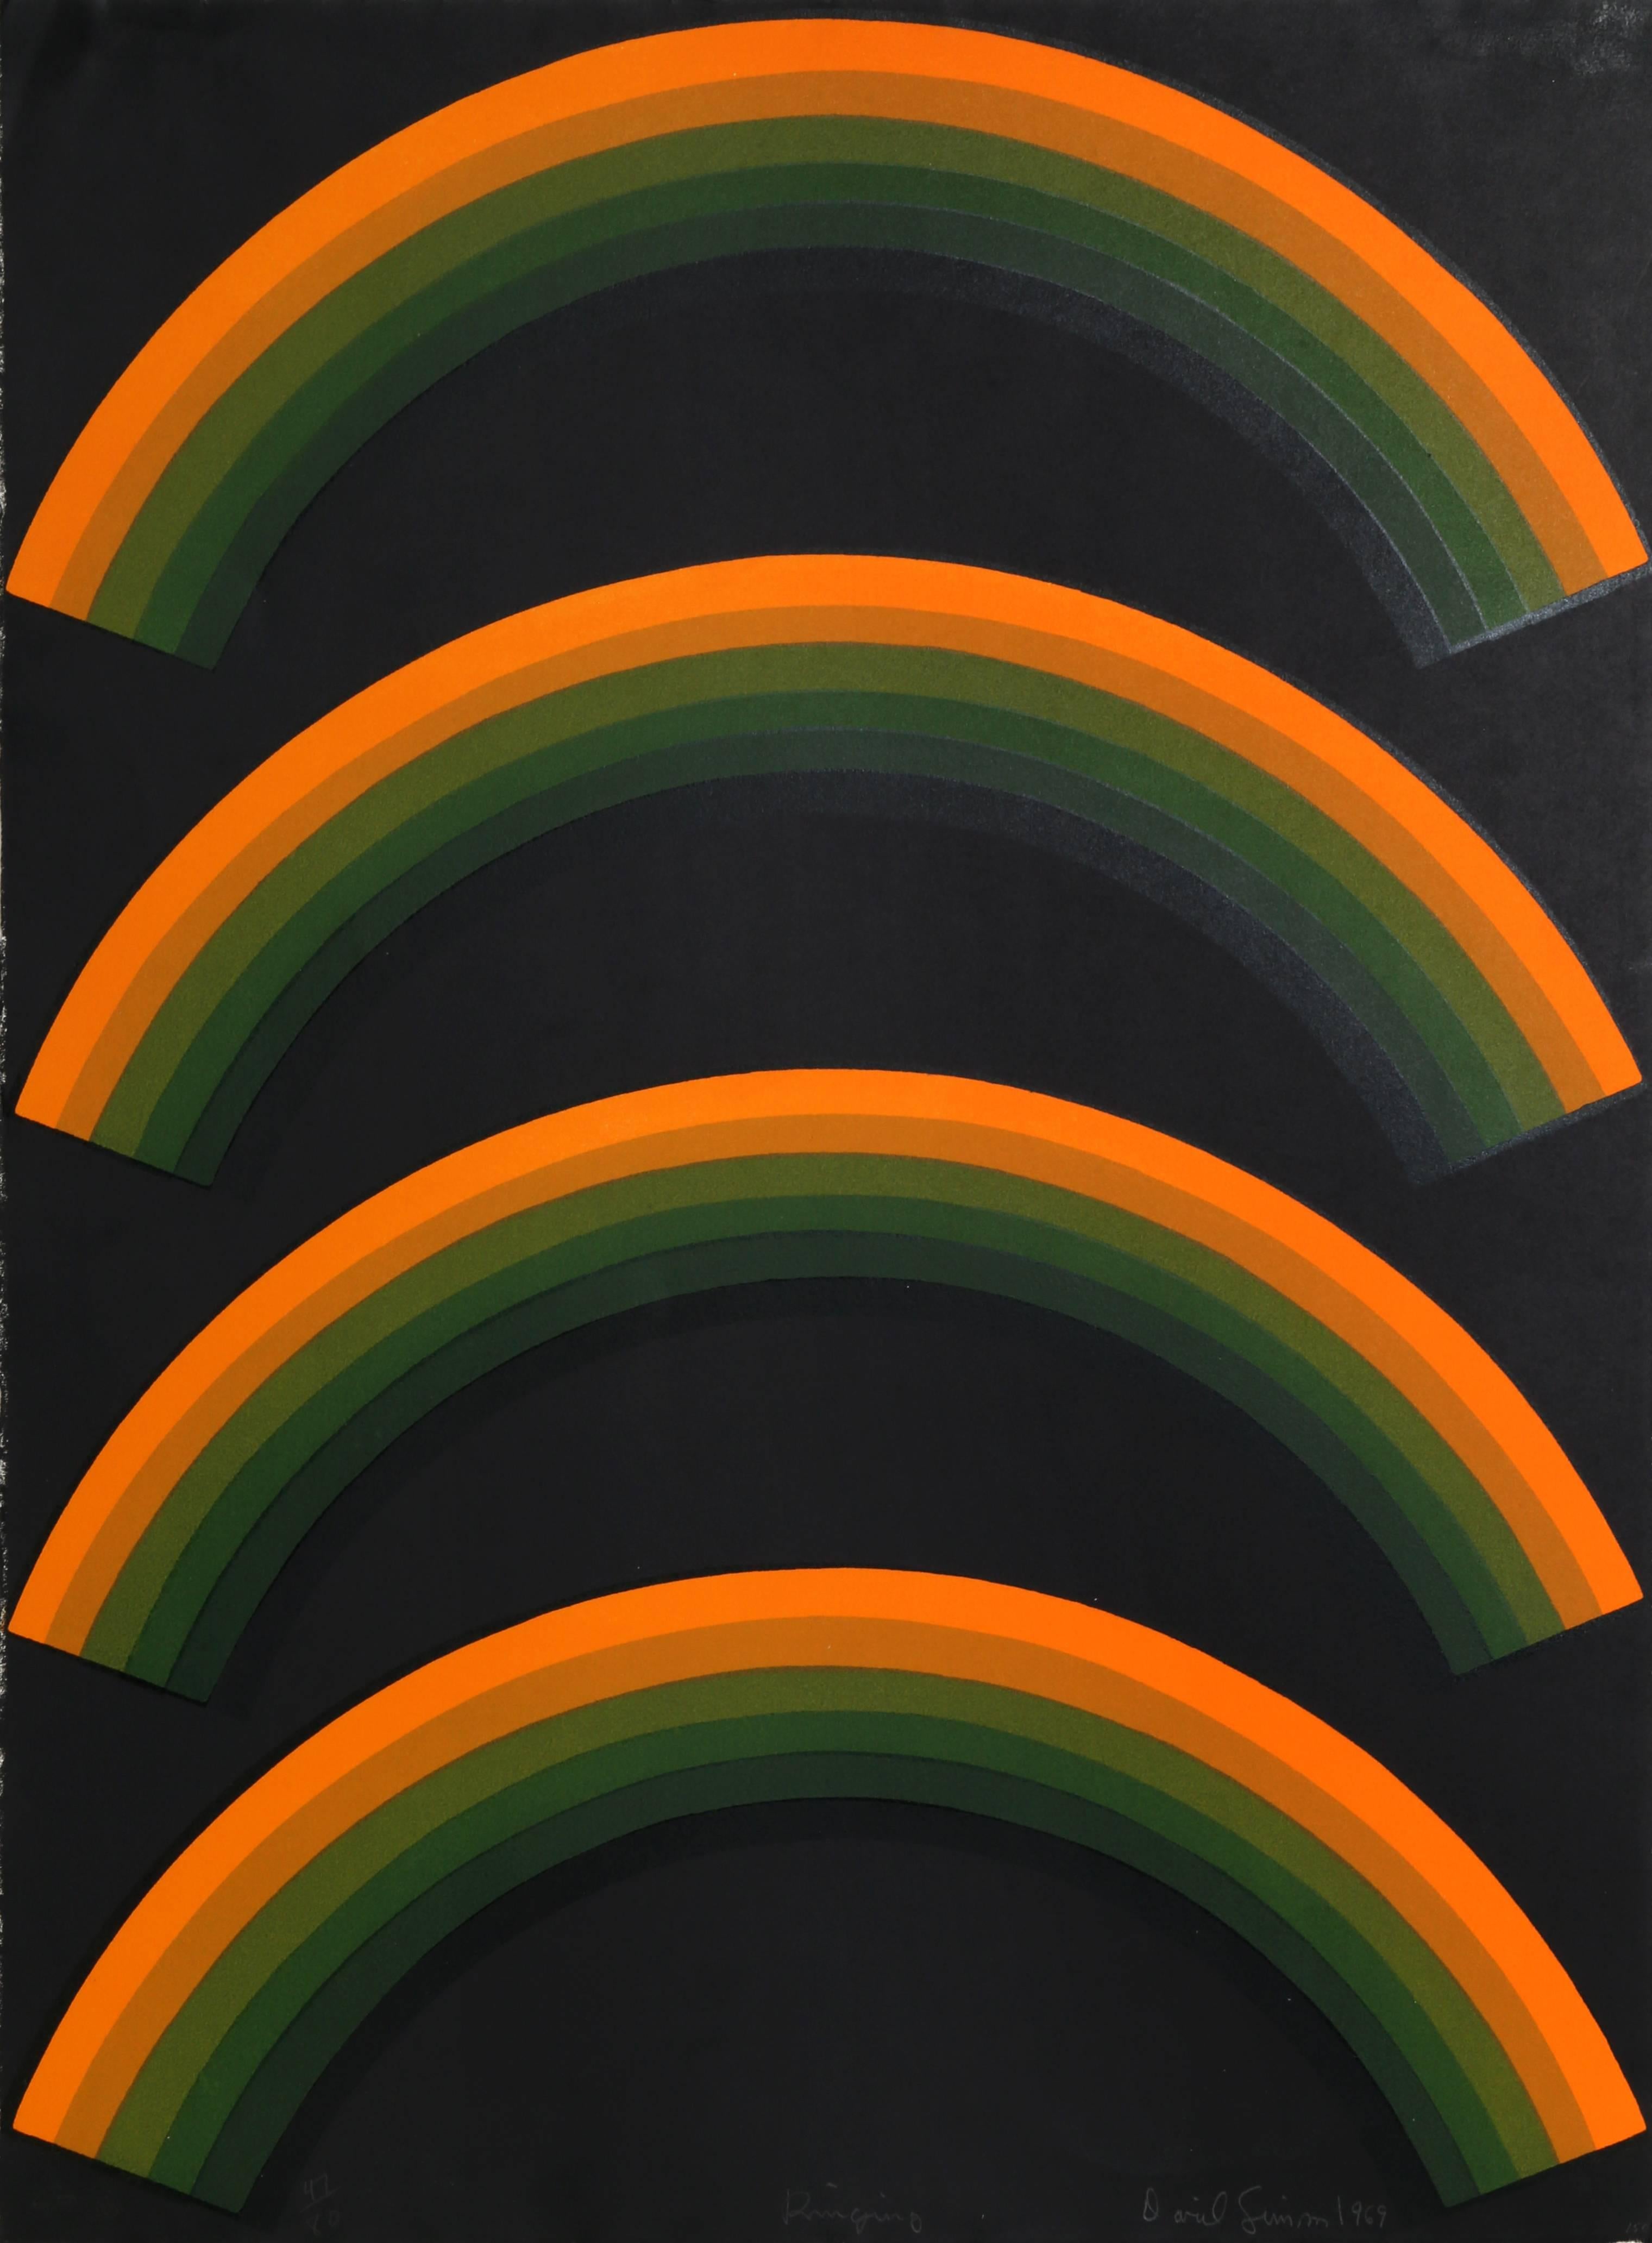 Artist: David Simpson
Title: Ringling
Year: c. 1969
Medium: Serigraph, signed and numbered in pencil
Edition: 80
Size: 30 x 22.5 inches